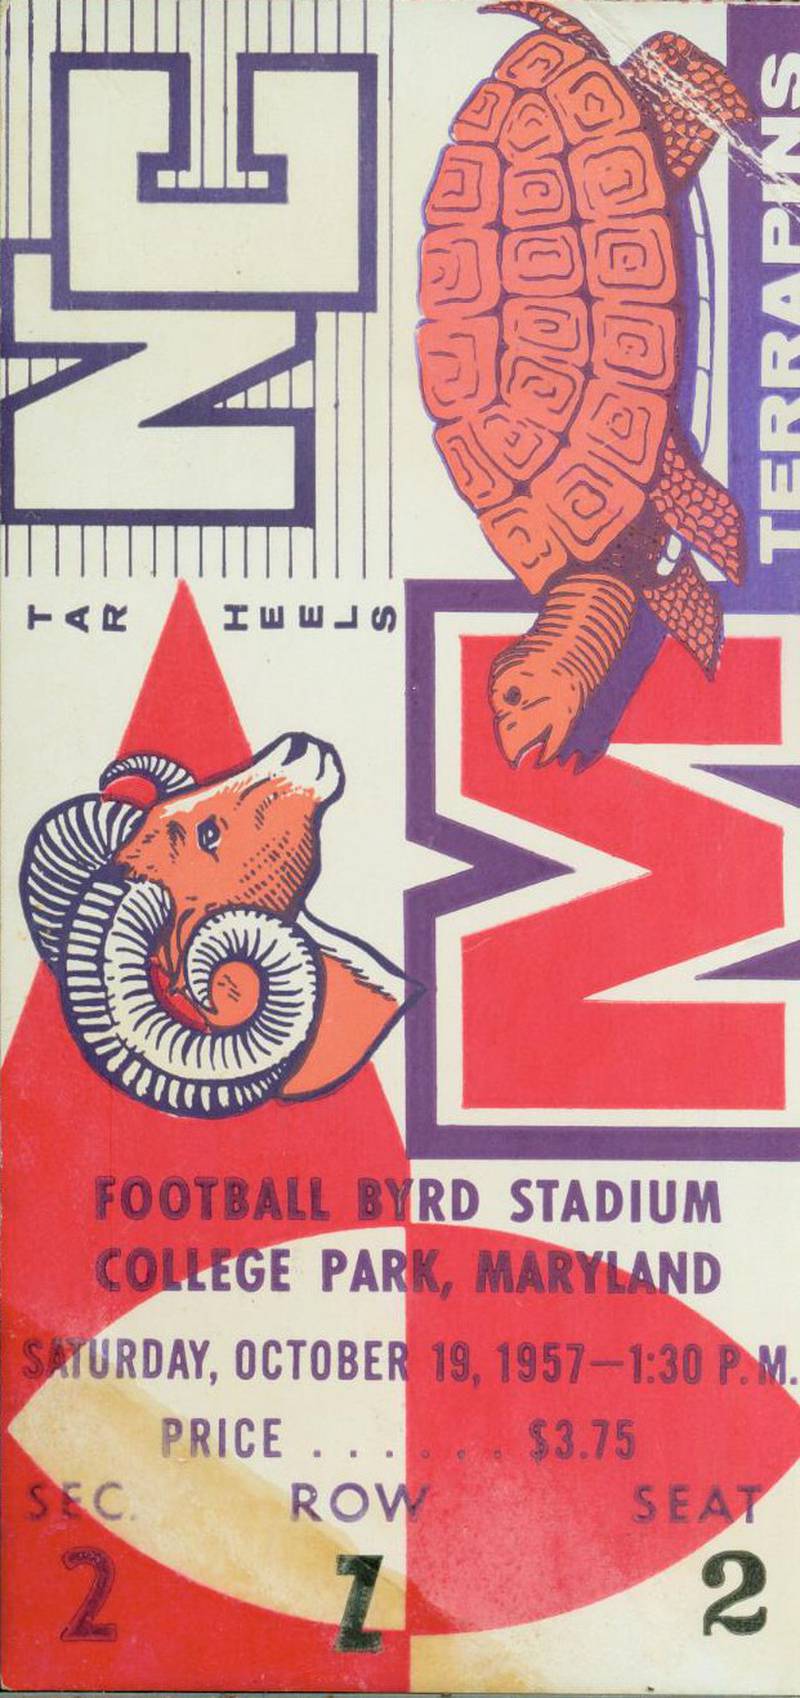 Queen Elizabeth's ticket stub to the University of Maryland versus University of North Carolina football game, October 19, 1957. Courtesy of University of Maryland Archives.